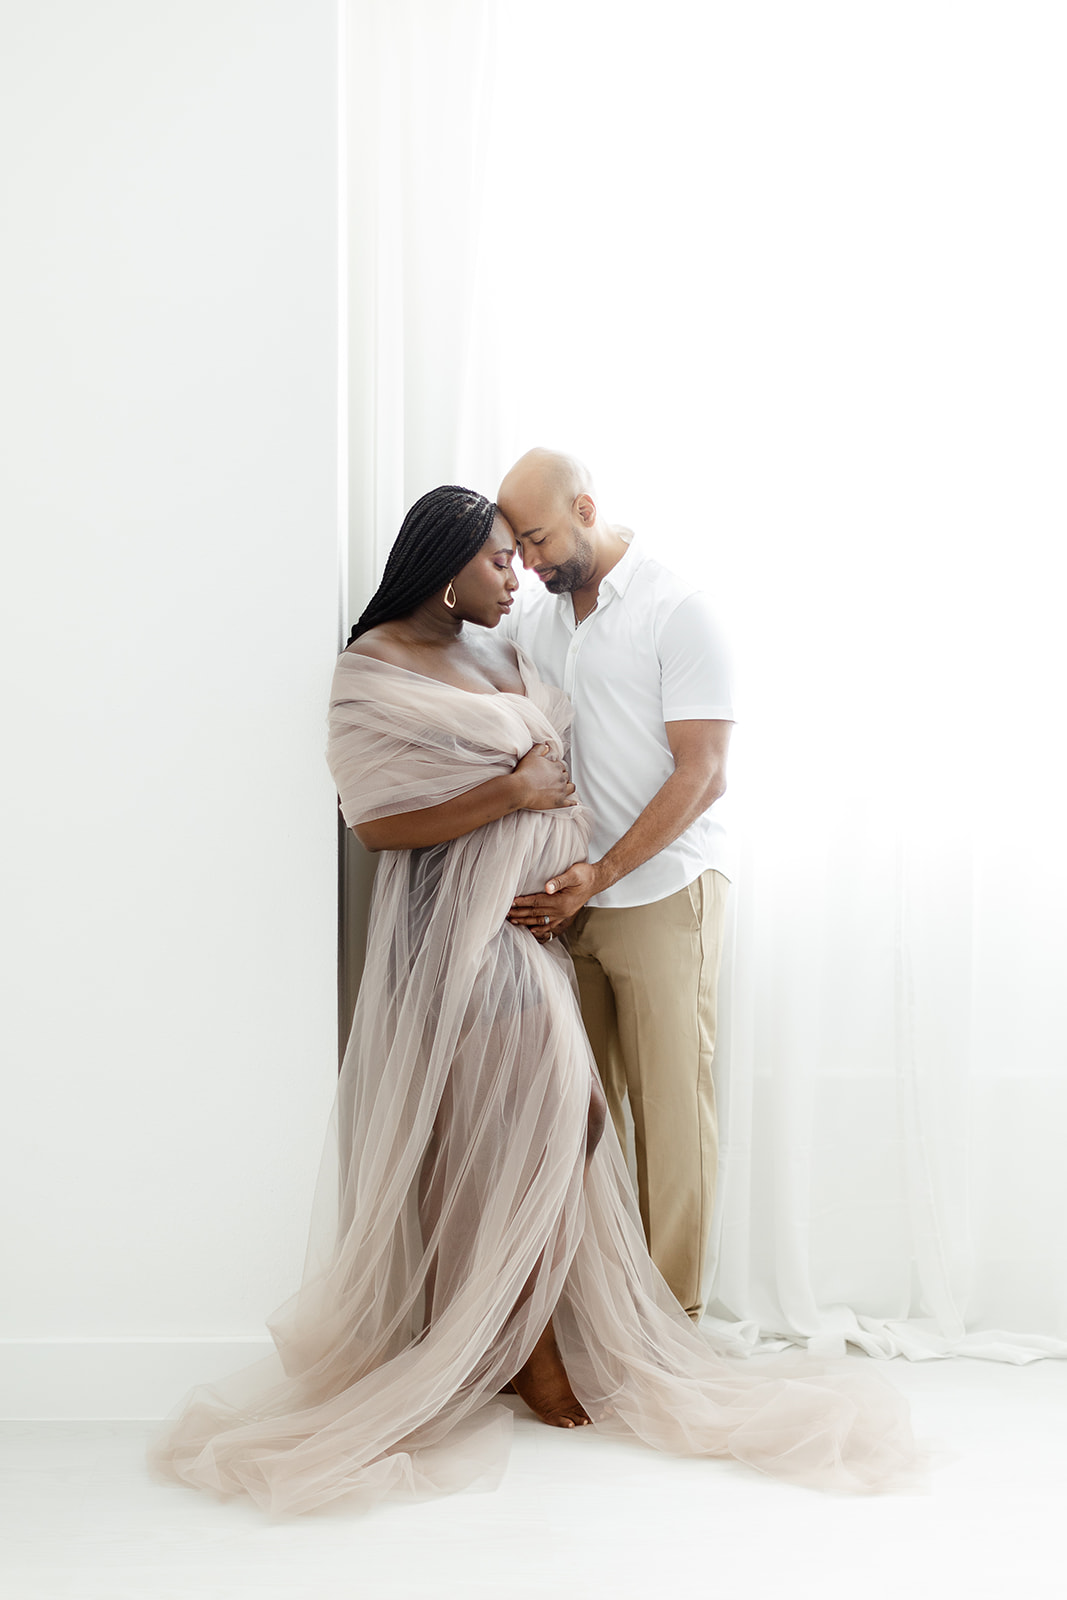 Expecting parents share an intimate moment touching foreheads and holding the bump in a studio window